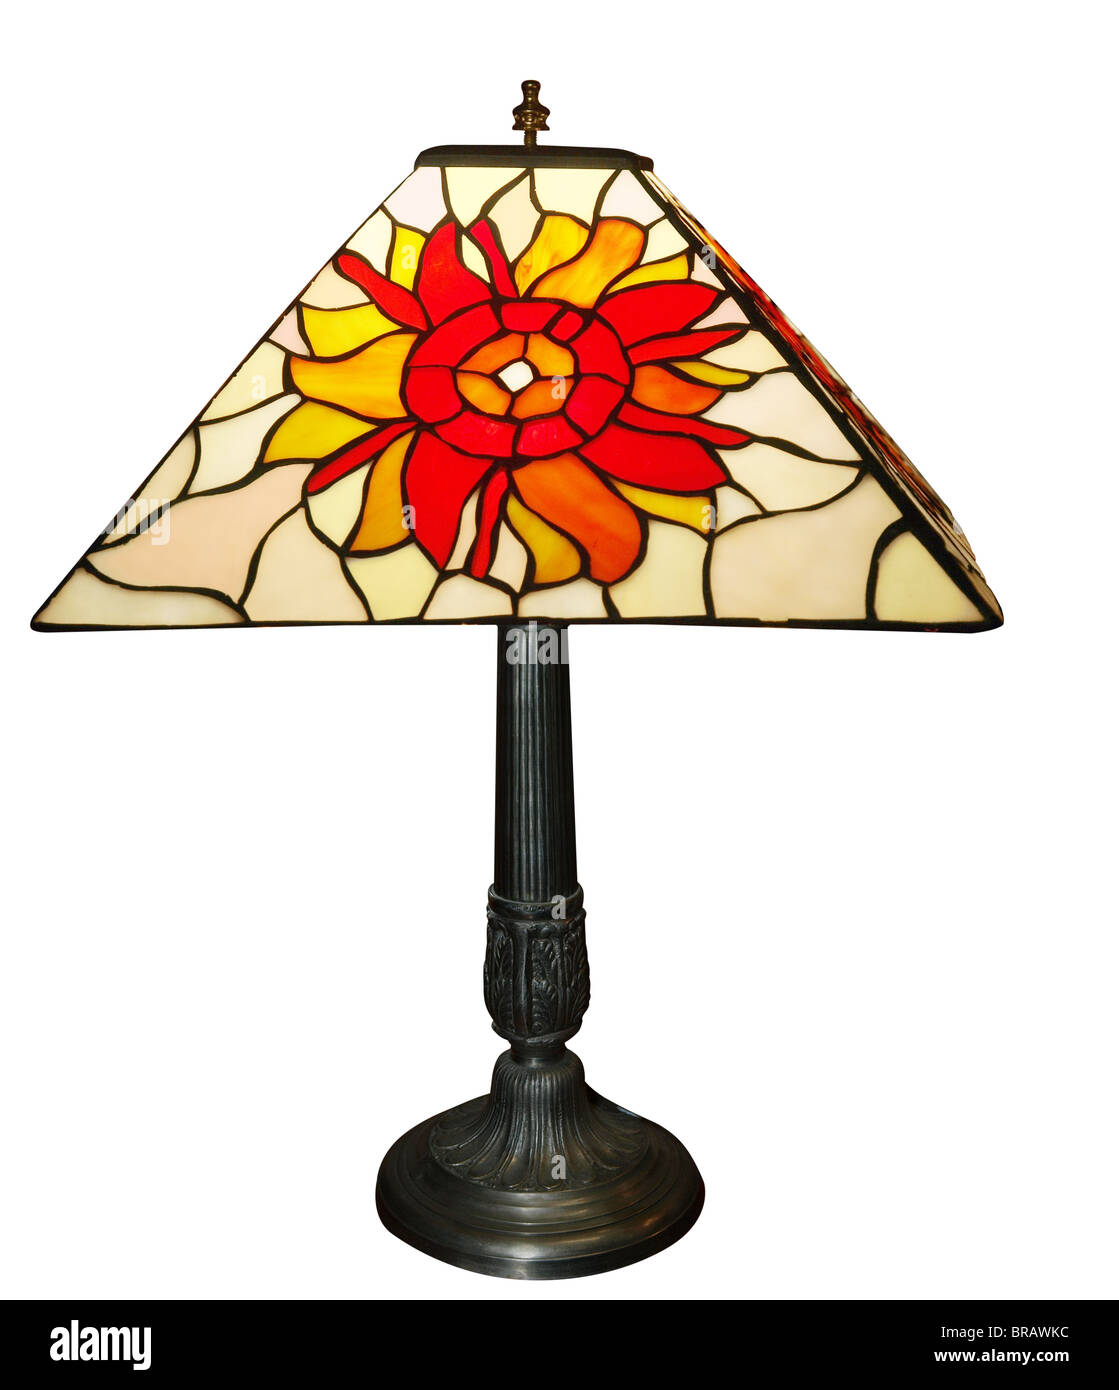 Antique Lead Light Lamp isolated with clipping path Stock Photo